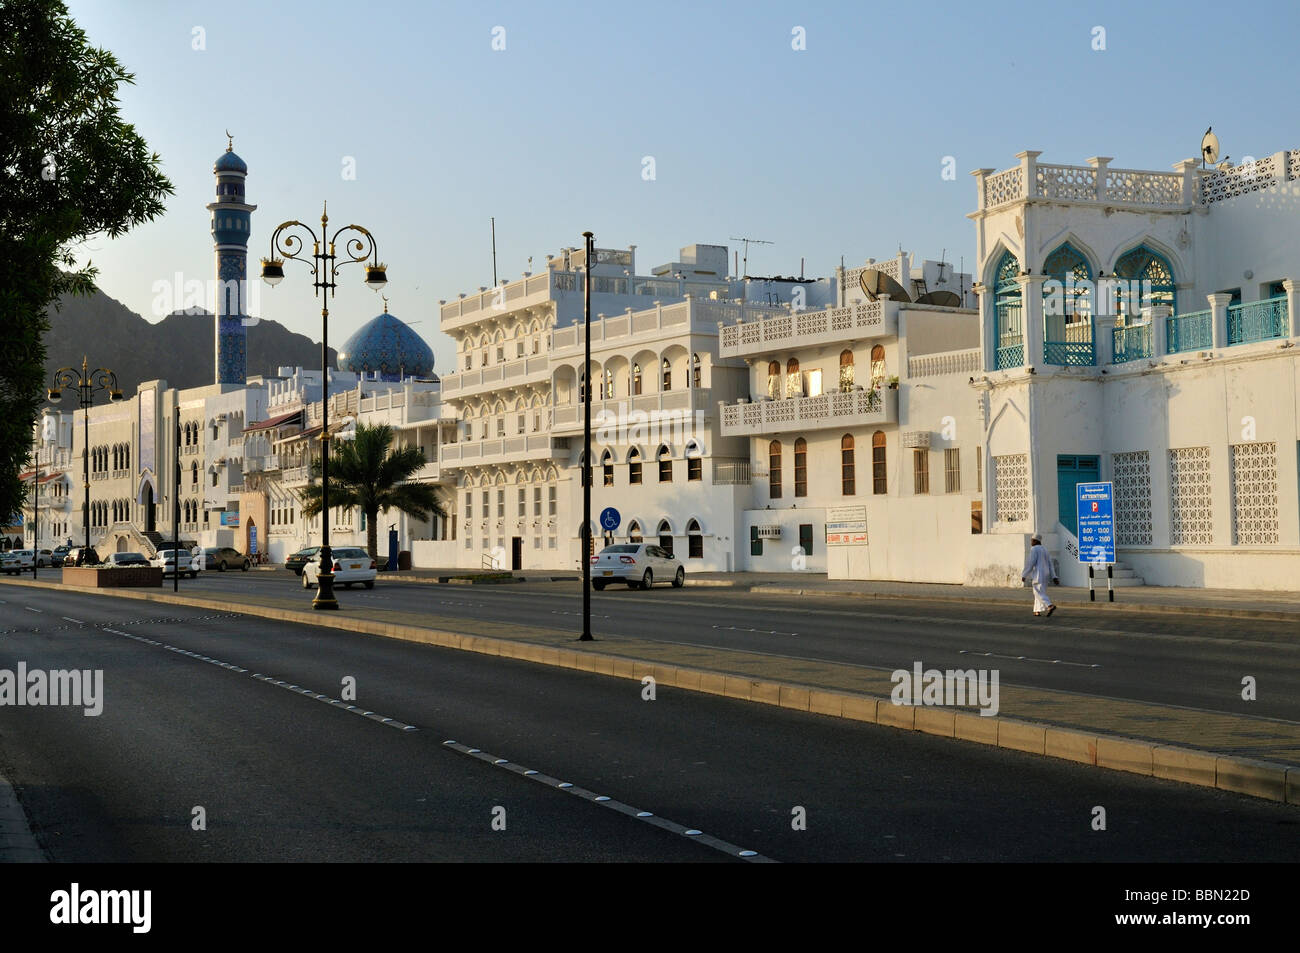 Historic merchant houses, Corniche of Mutrah, Muscat, Sultanate of Oman, Arabia, Middle East Stock Photo